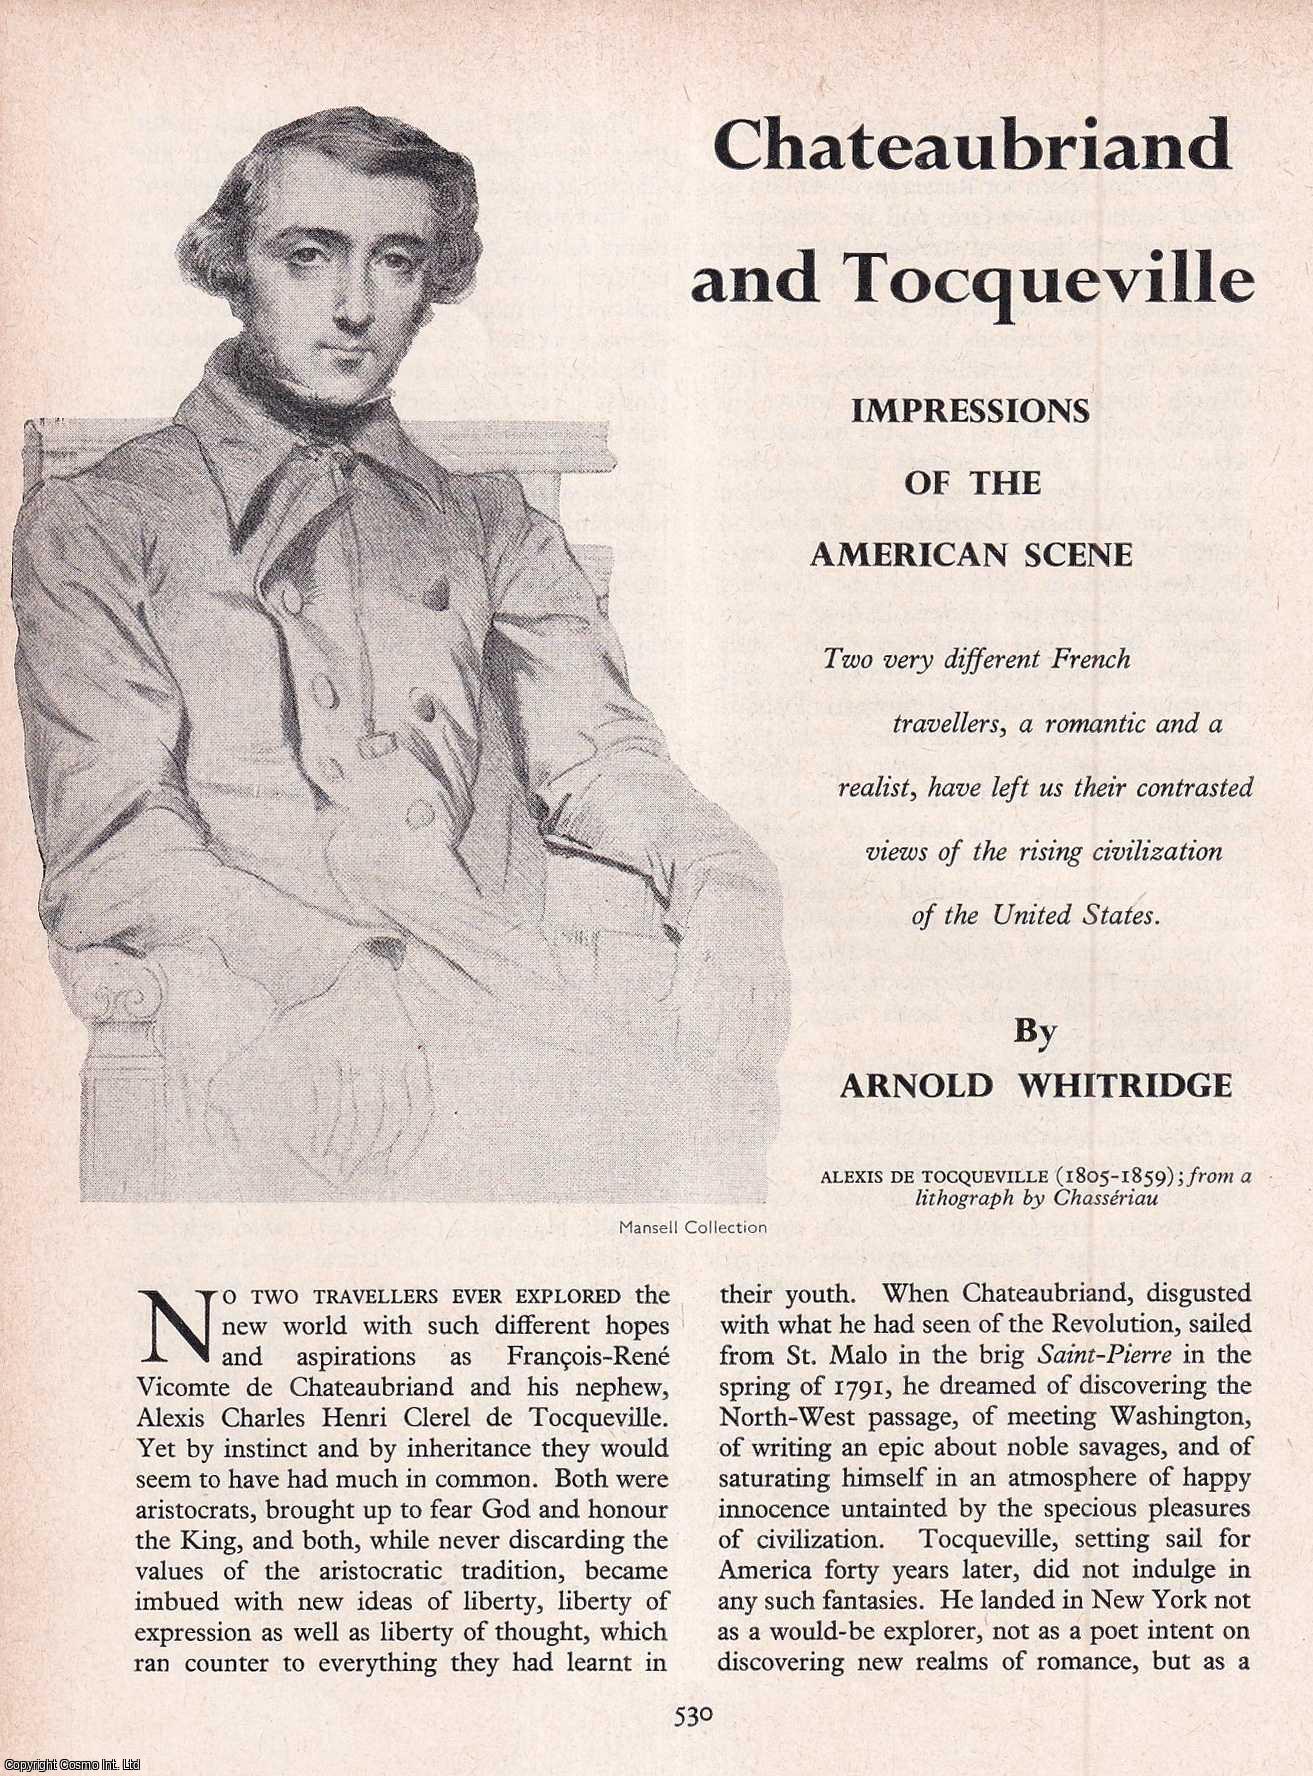 Arnold Whitridge - Chateaubriand and Tocqueville: Impressions of The American Scene. An original article from History Today magazine, 1963.